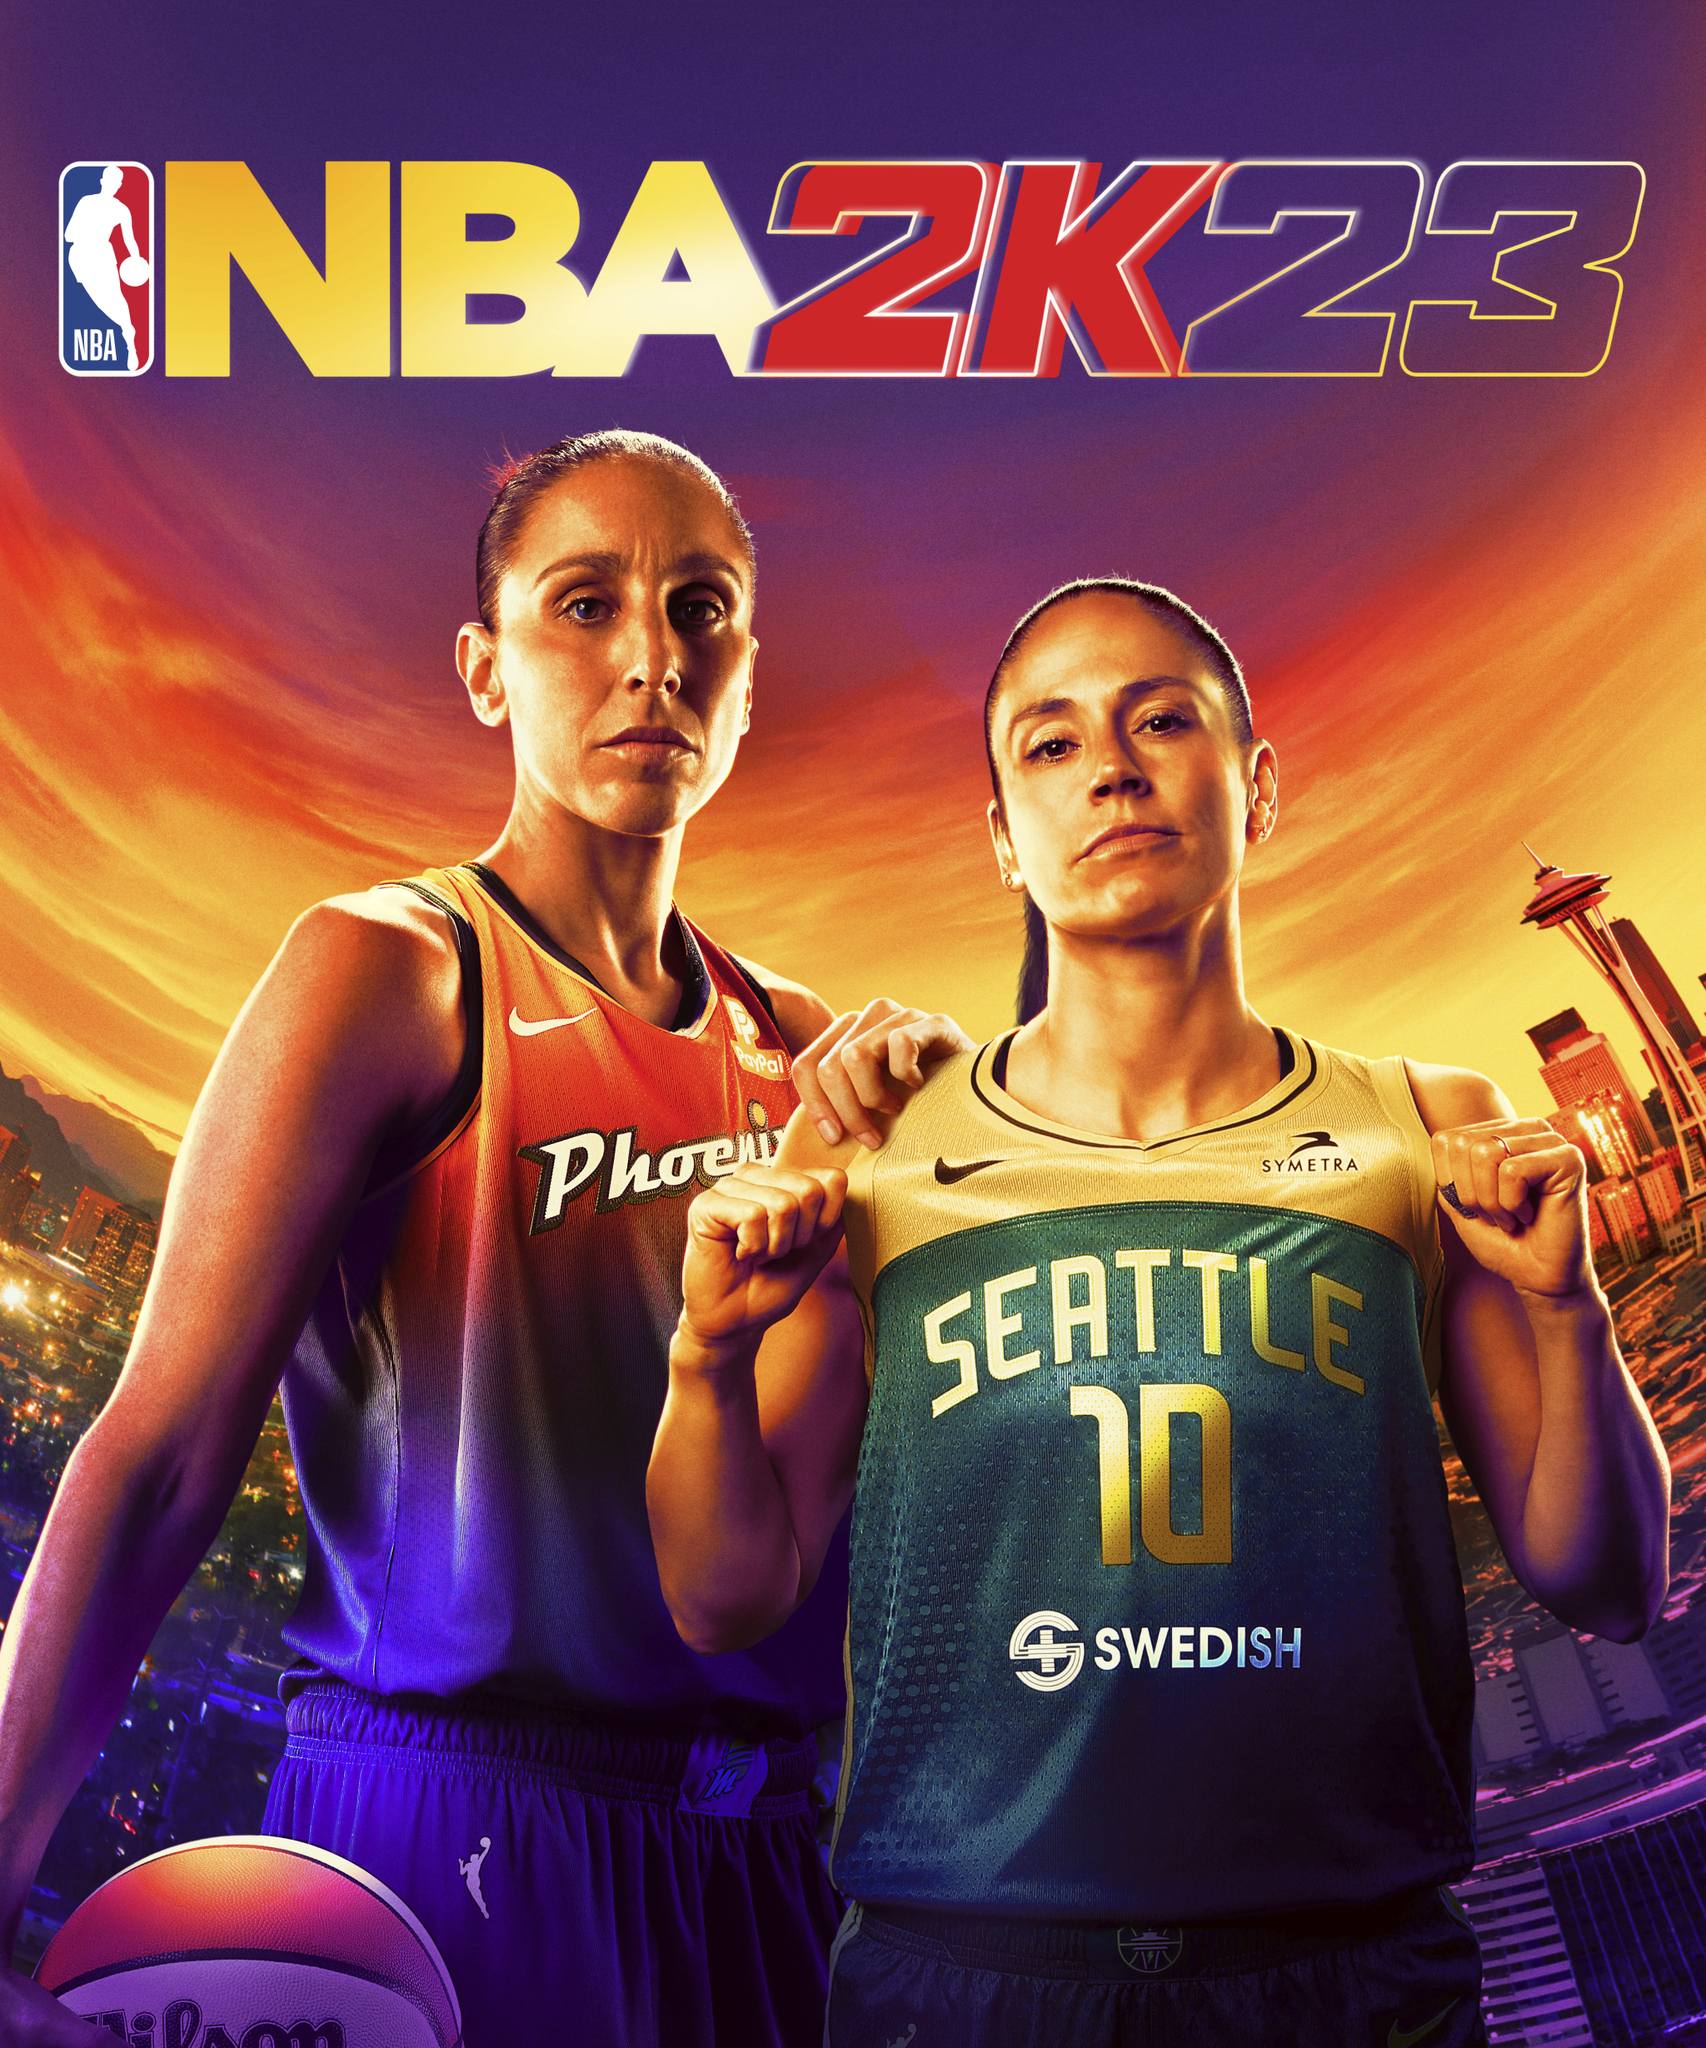 Sue Bird And Diana Taurasi For NBA 2K23: Ballers Who Break Barriers